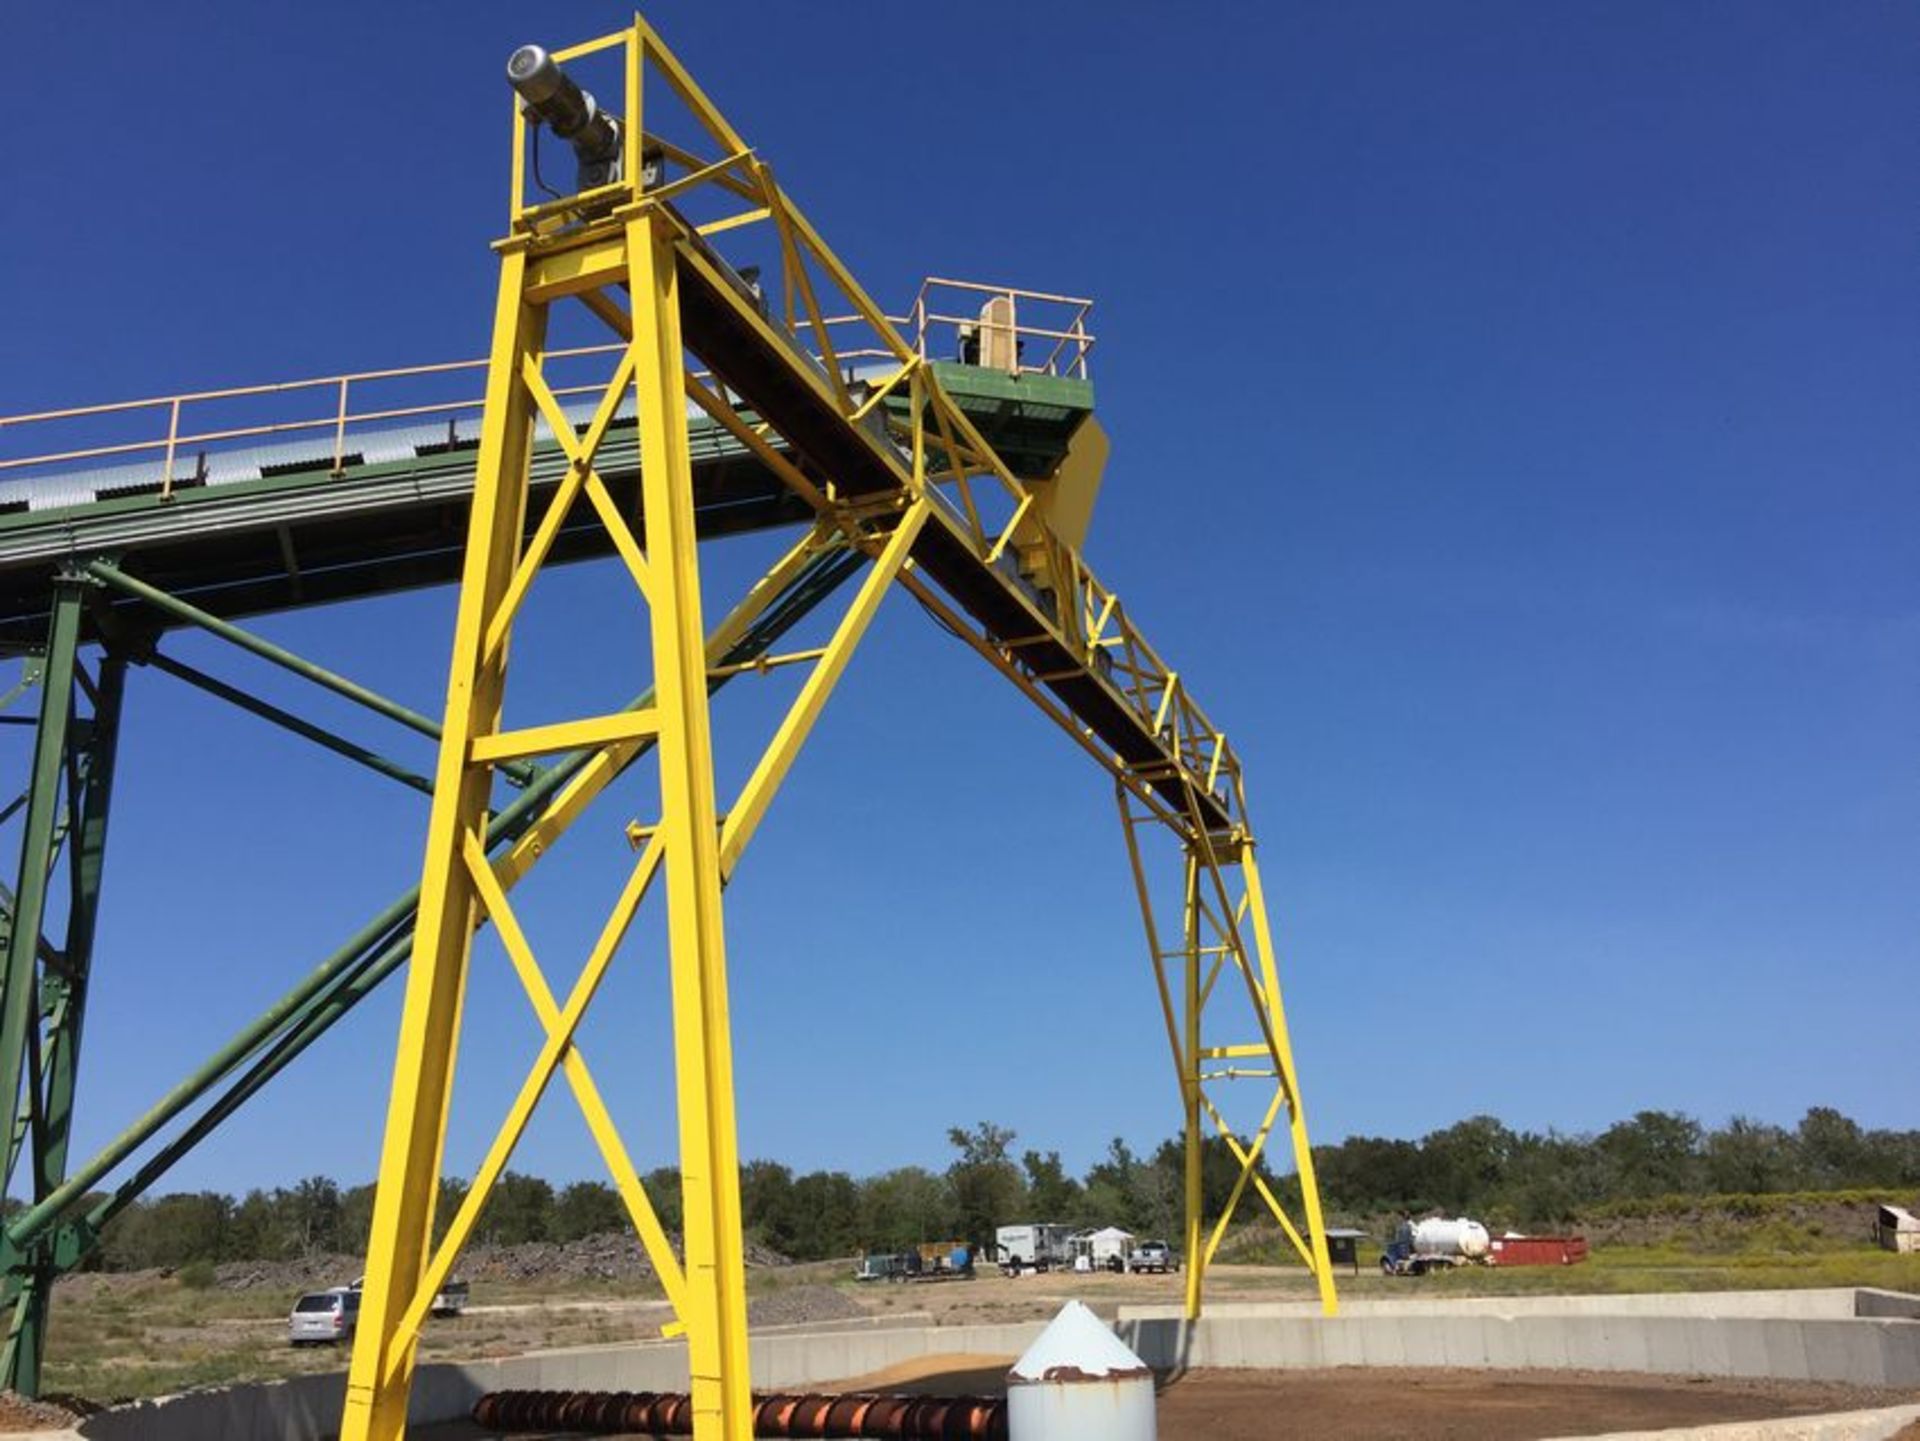 Auger Conveyor, approx. 60 ft., w/ stand. (Above Laidig Pit)